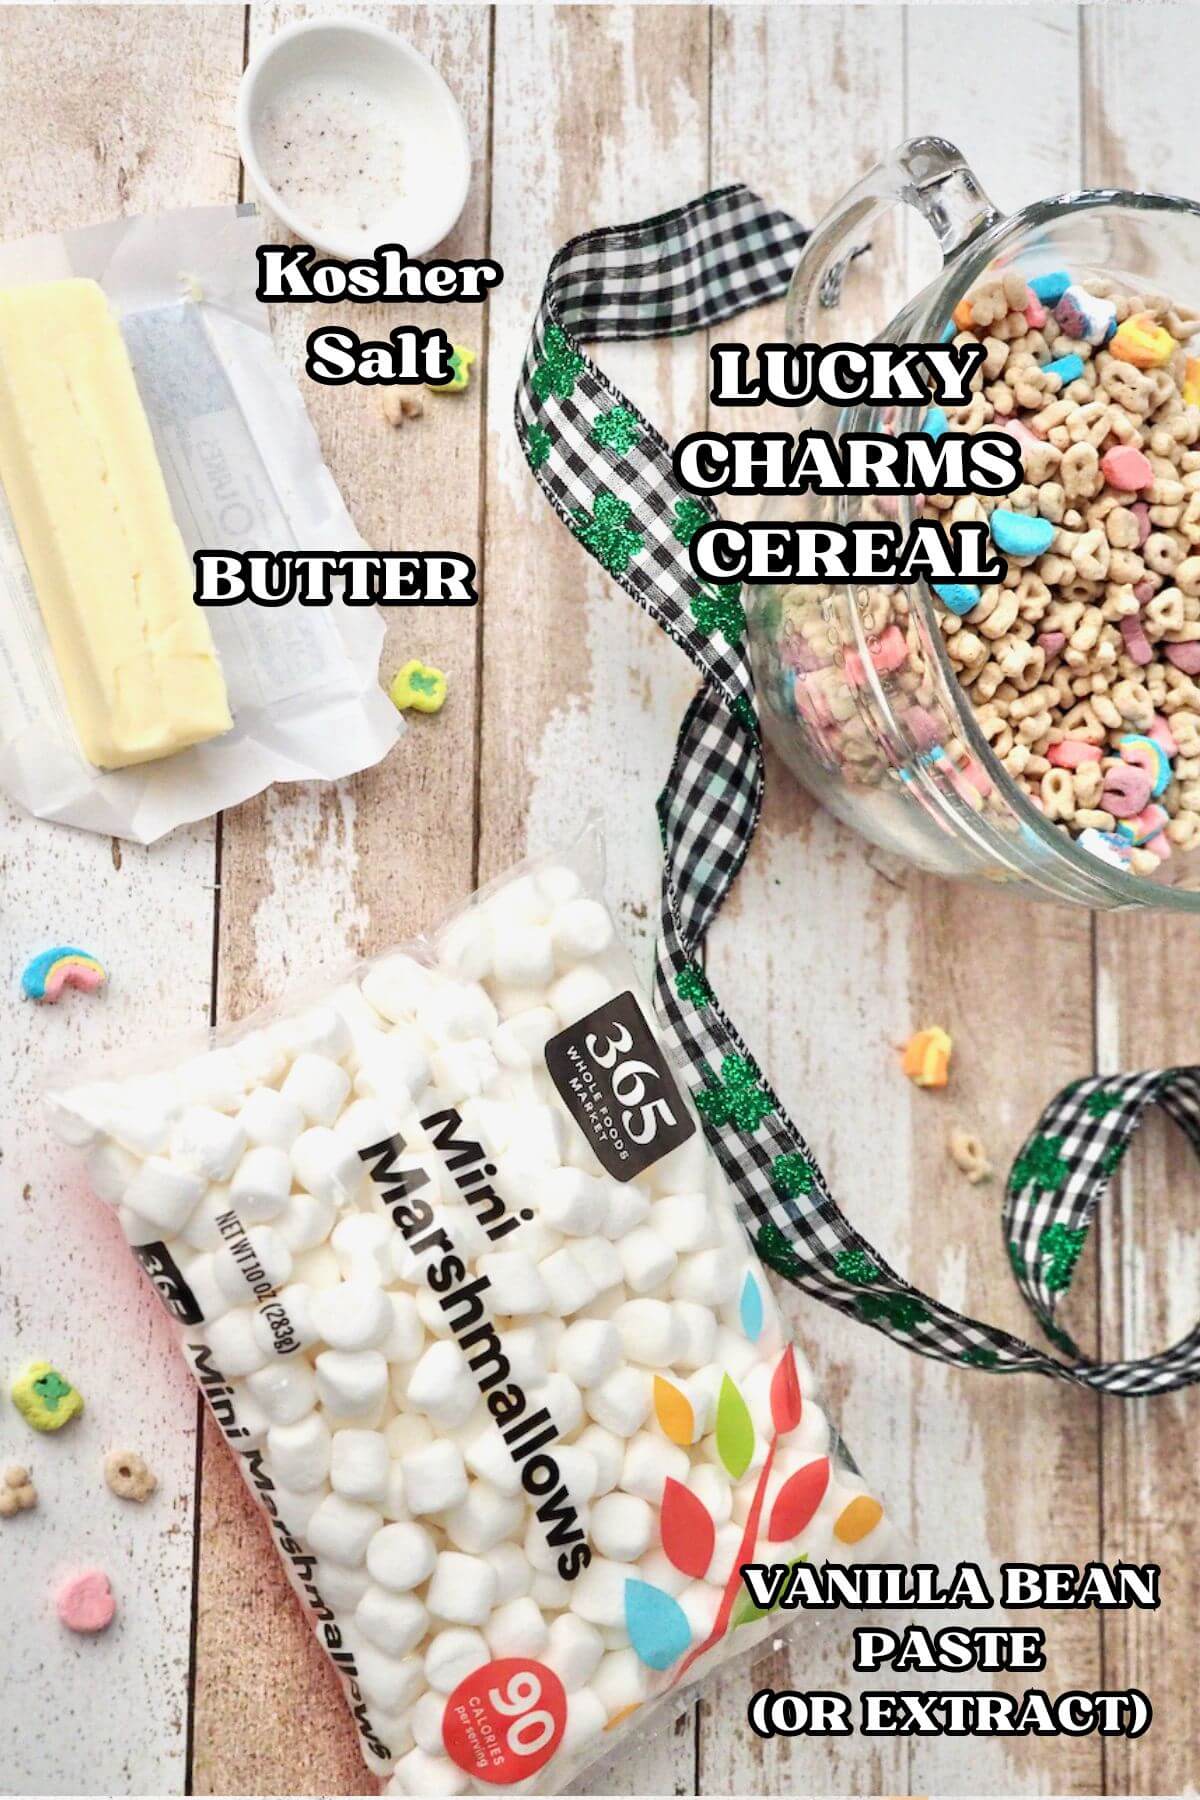 Labeled ingredients for Lucky Charms Rice Krispie treats.